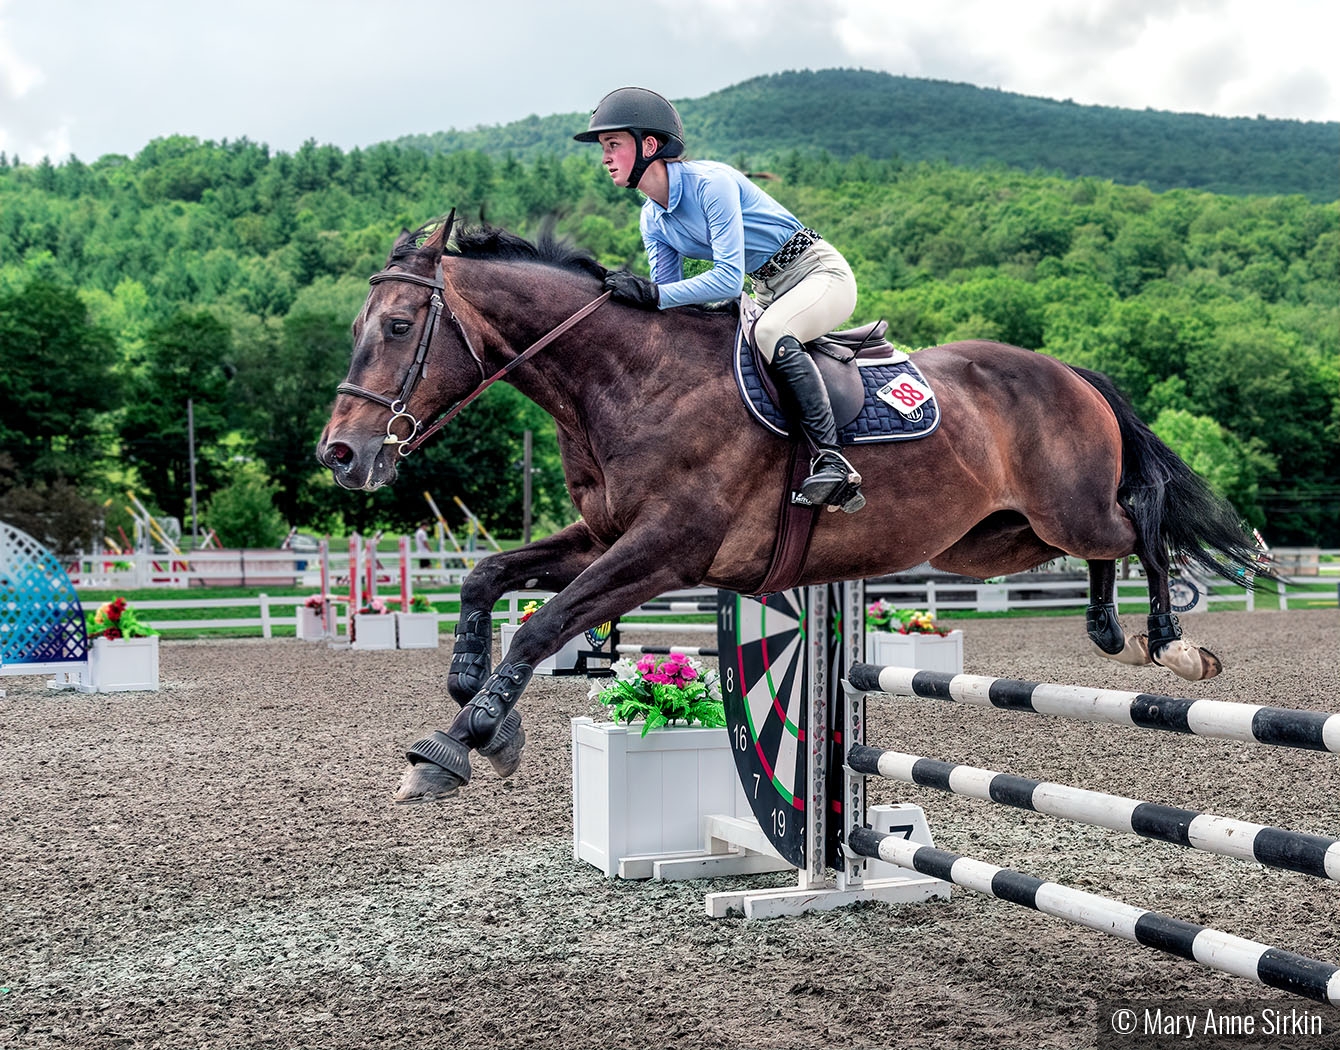 Airborne at the Vermont Classic Horse Show by Mary Anne Sirkin